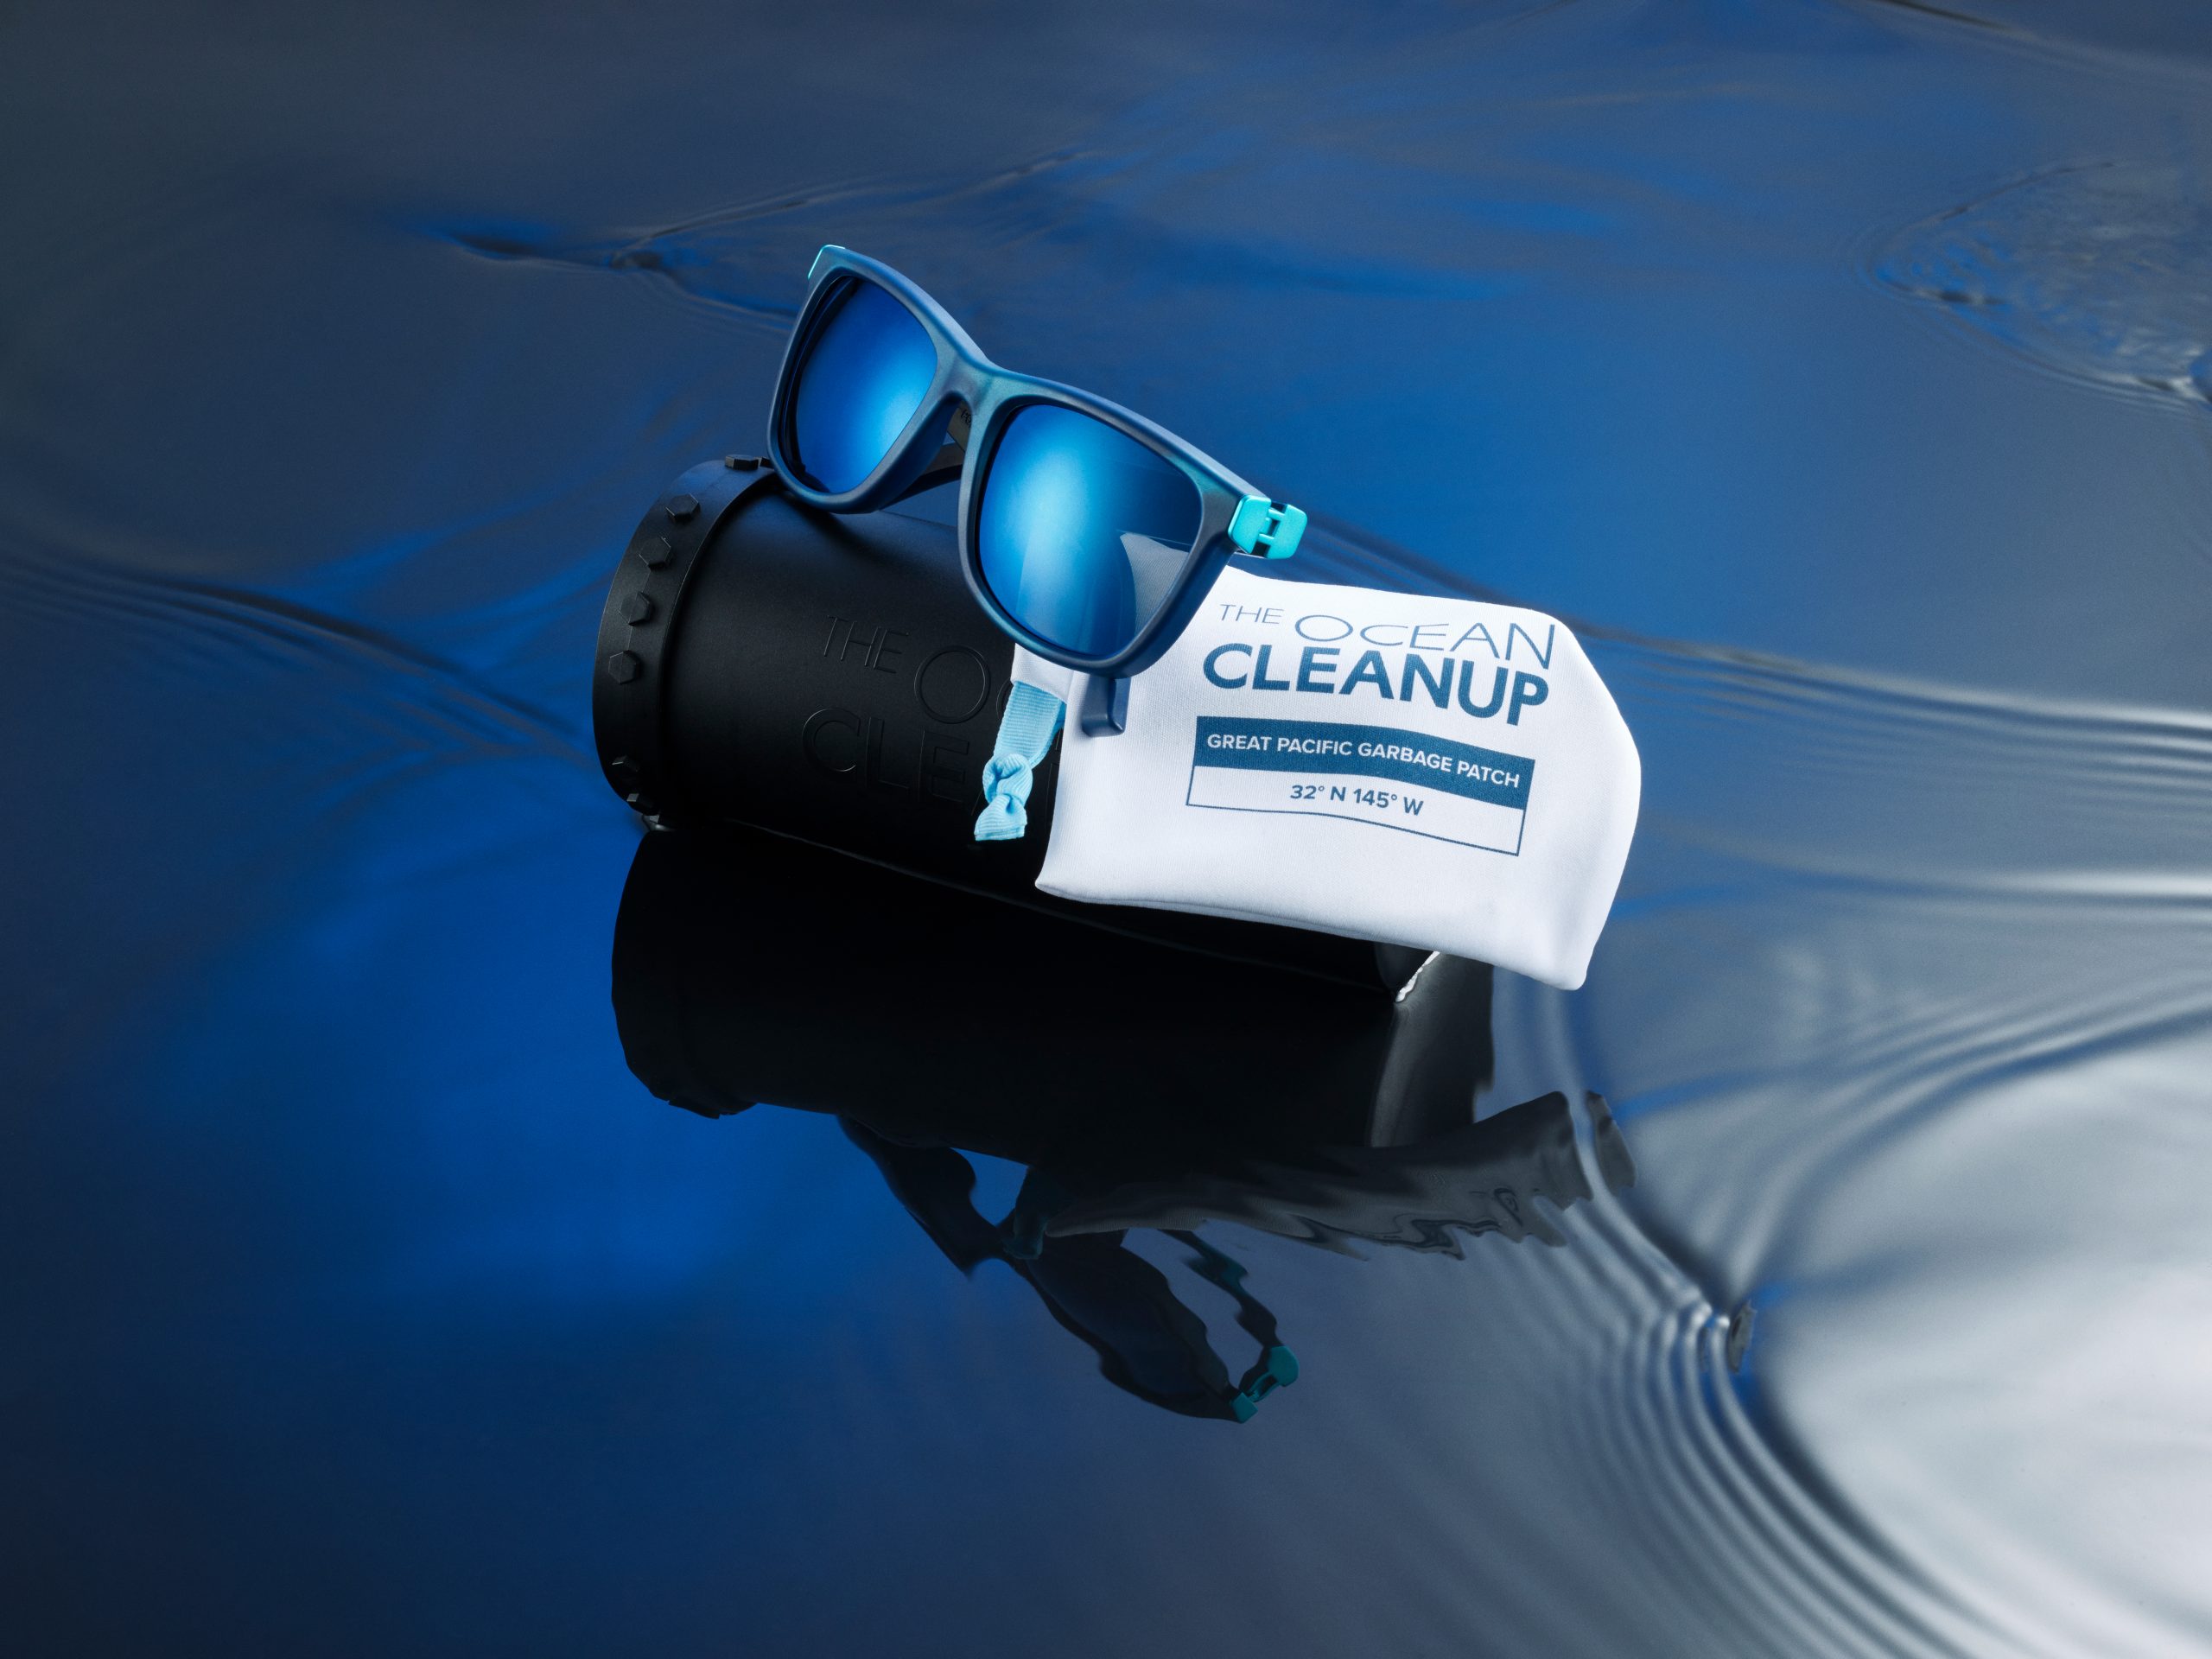 The glasses are made with the first plastic catch during the System 001/B campaign in the GPGP. When the campaign concluded, the plastic was returned to shore in December 2019, marking the end of Mission One and starting the next journey: going full circle from trash to treasure by creating a product to help fund further cleanup. To learn more or buy the glasses click link ?